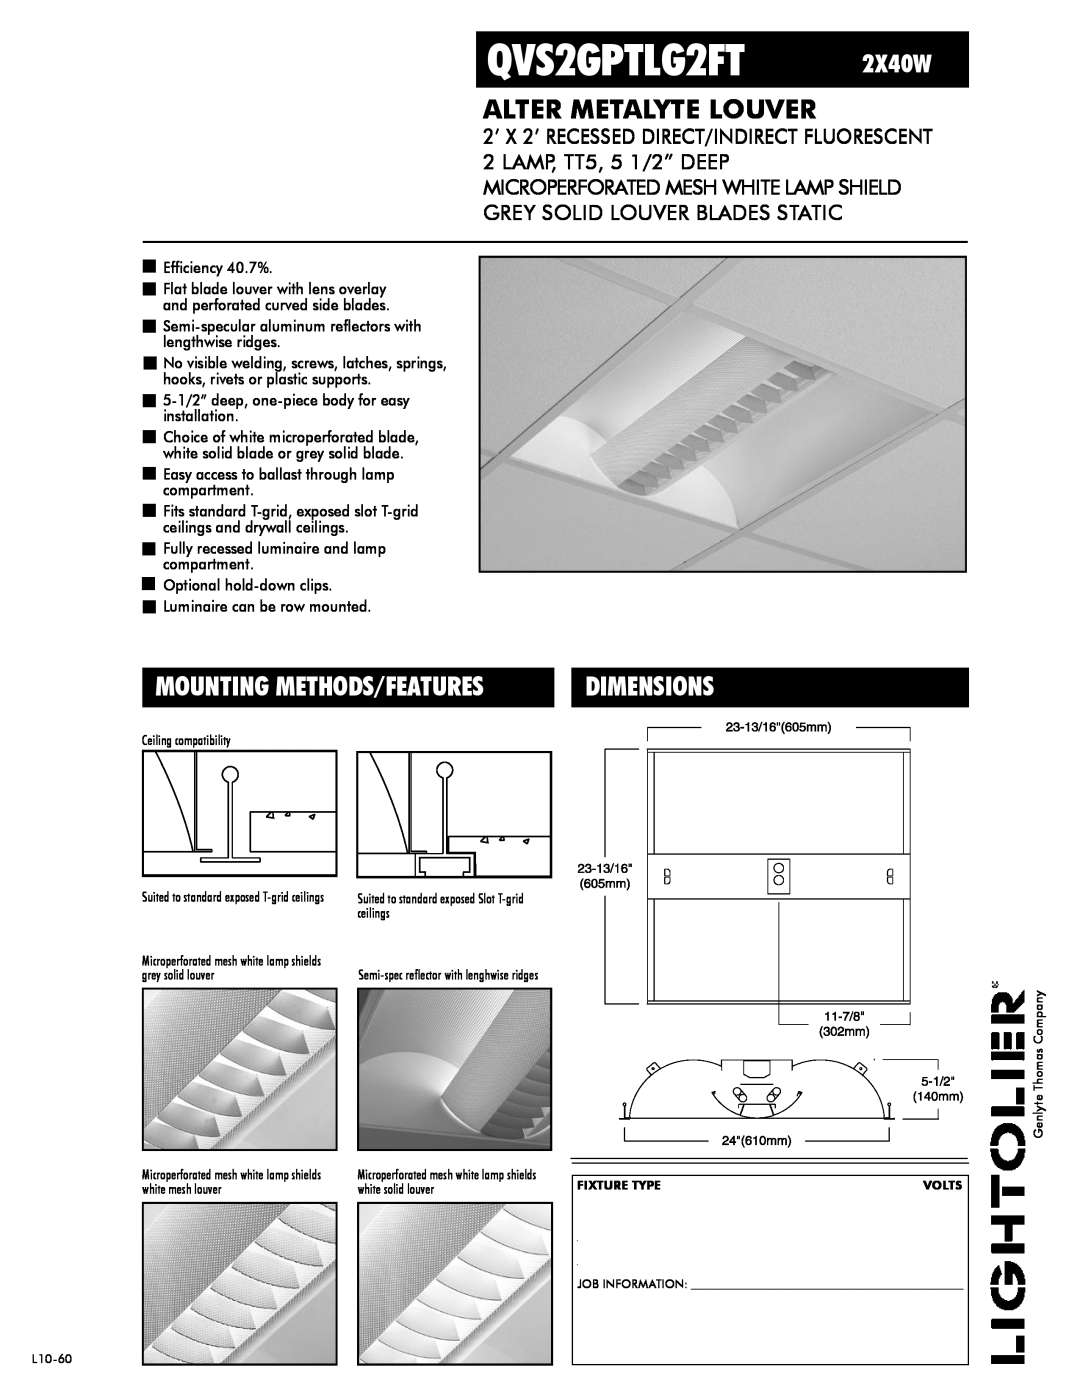 Lightolier dimensions Efficiency 40.7%, Mounting Methods/Features, Dimensions, QVS2GPTLG2FT 2X40W 